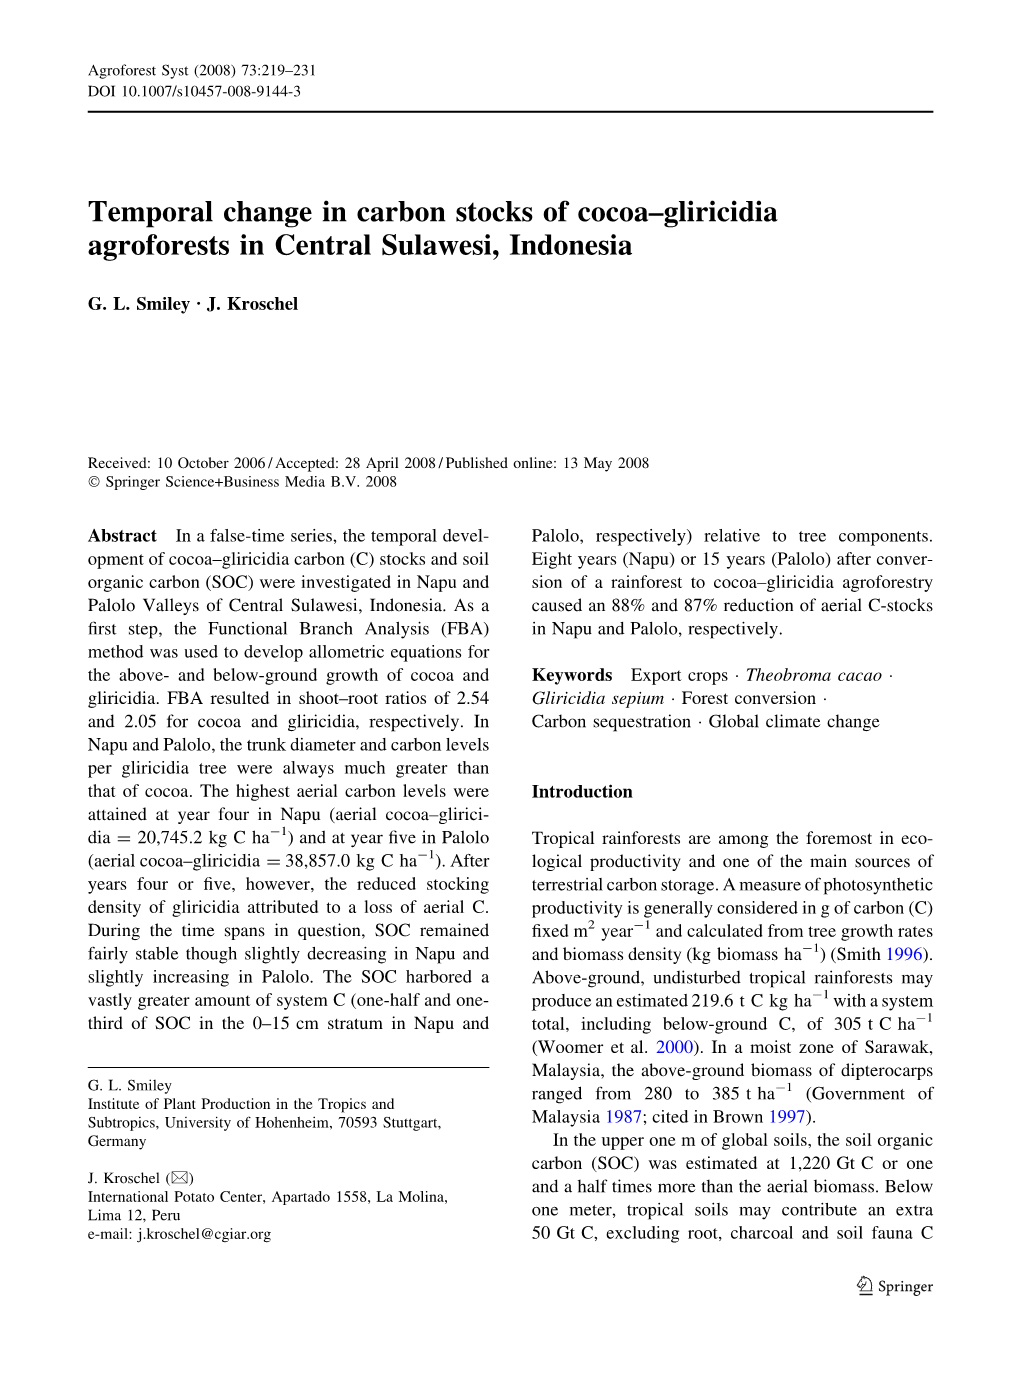 Temporal Change in Carbon Stocks of Cocoa–Gliricidia Agroforests in Central Sulawesi, Indonesia